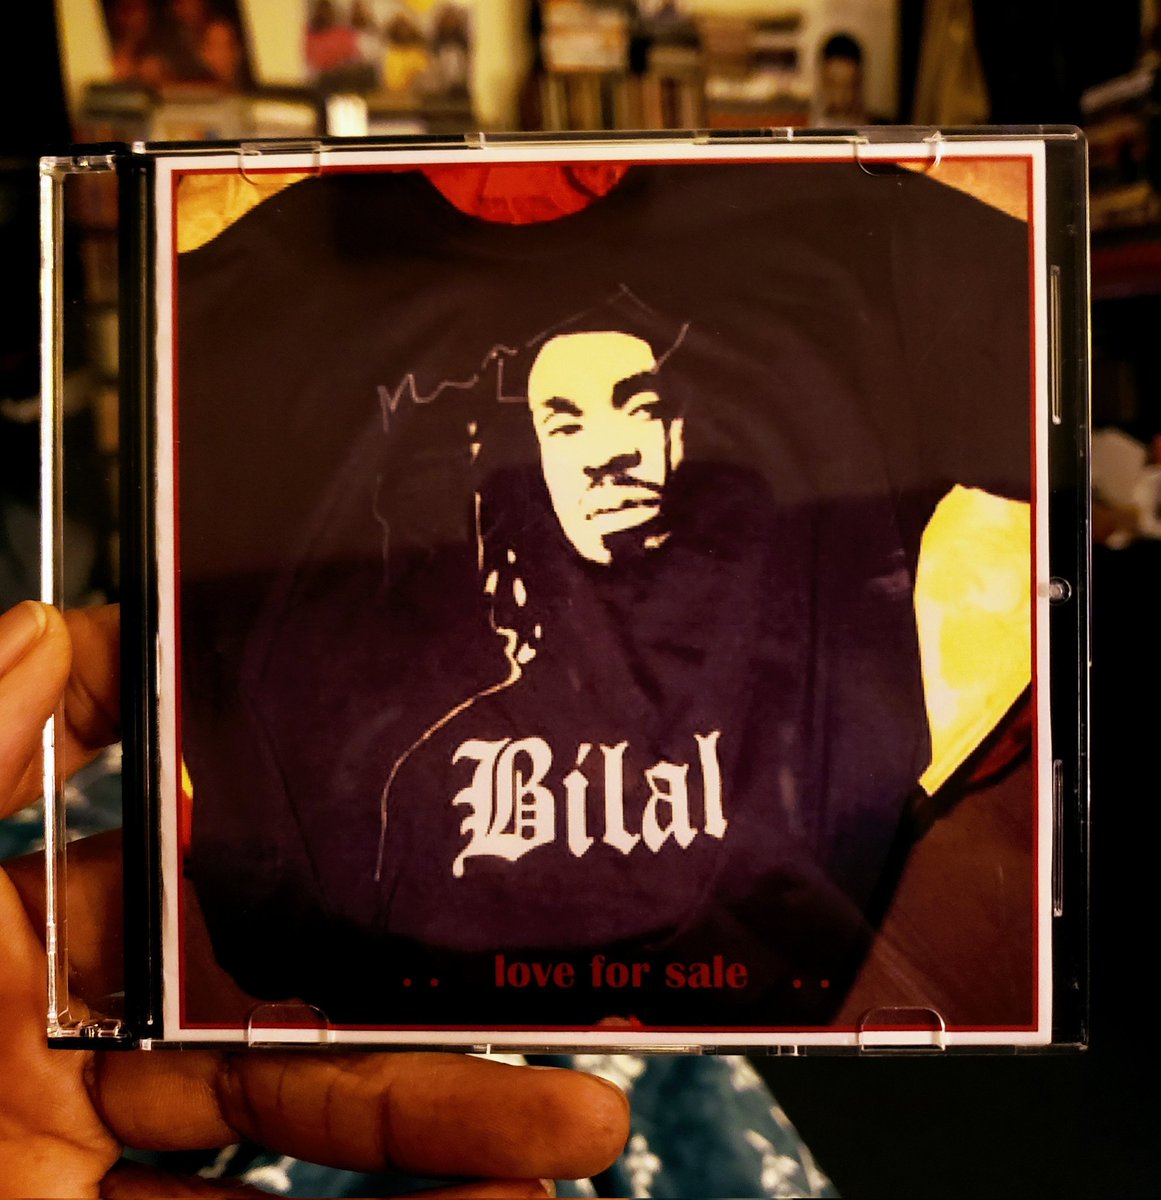 Tonight's mood is this bootleg copy of Bilal's 2003 unreleased album 'Love For Sale'. It's long overdue for this to get an official release. Come on Interscope or the powers that be!!!👊🏽 Mood 🎧 Artist: Bilal Album: Love For Sale Unreleased: 2003 #Mood #Bilal #LoveForSale